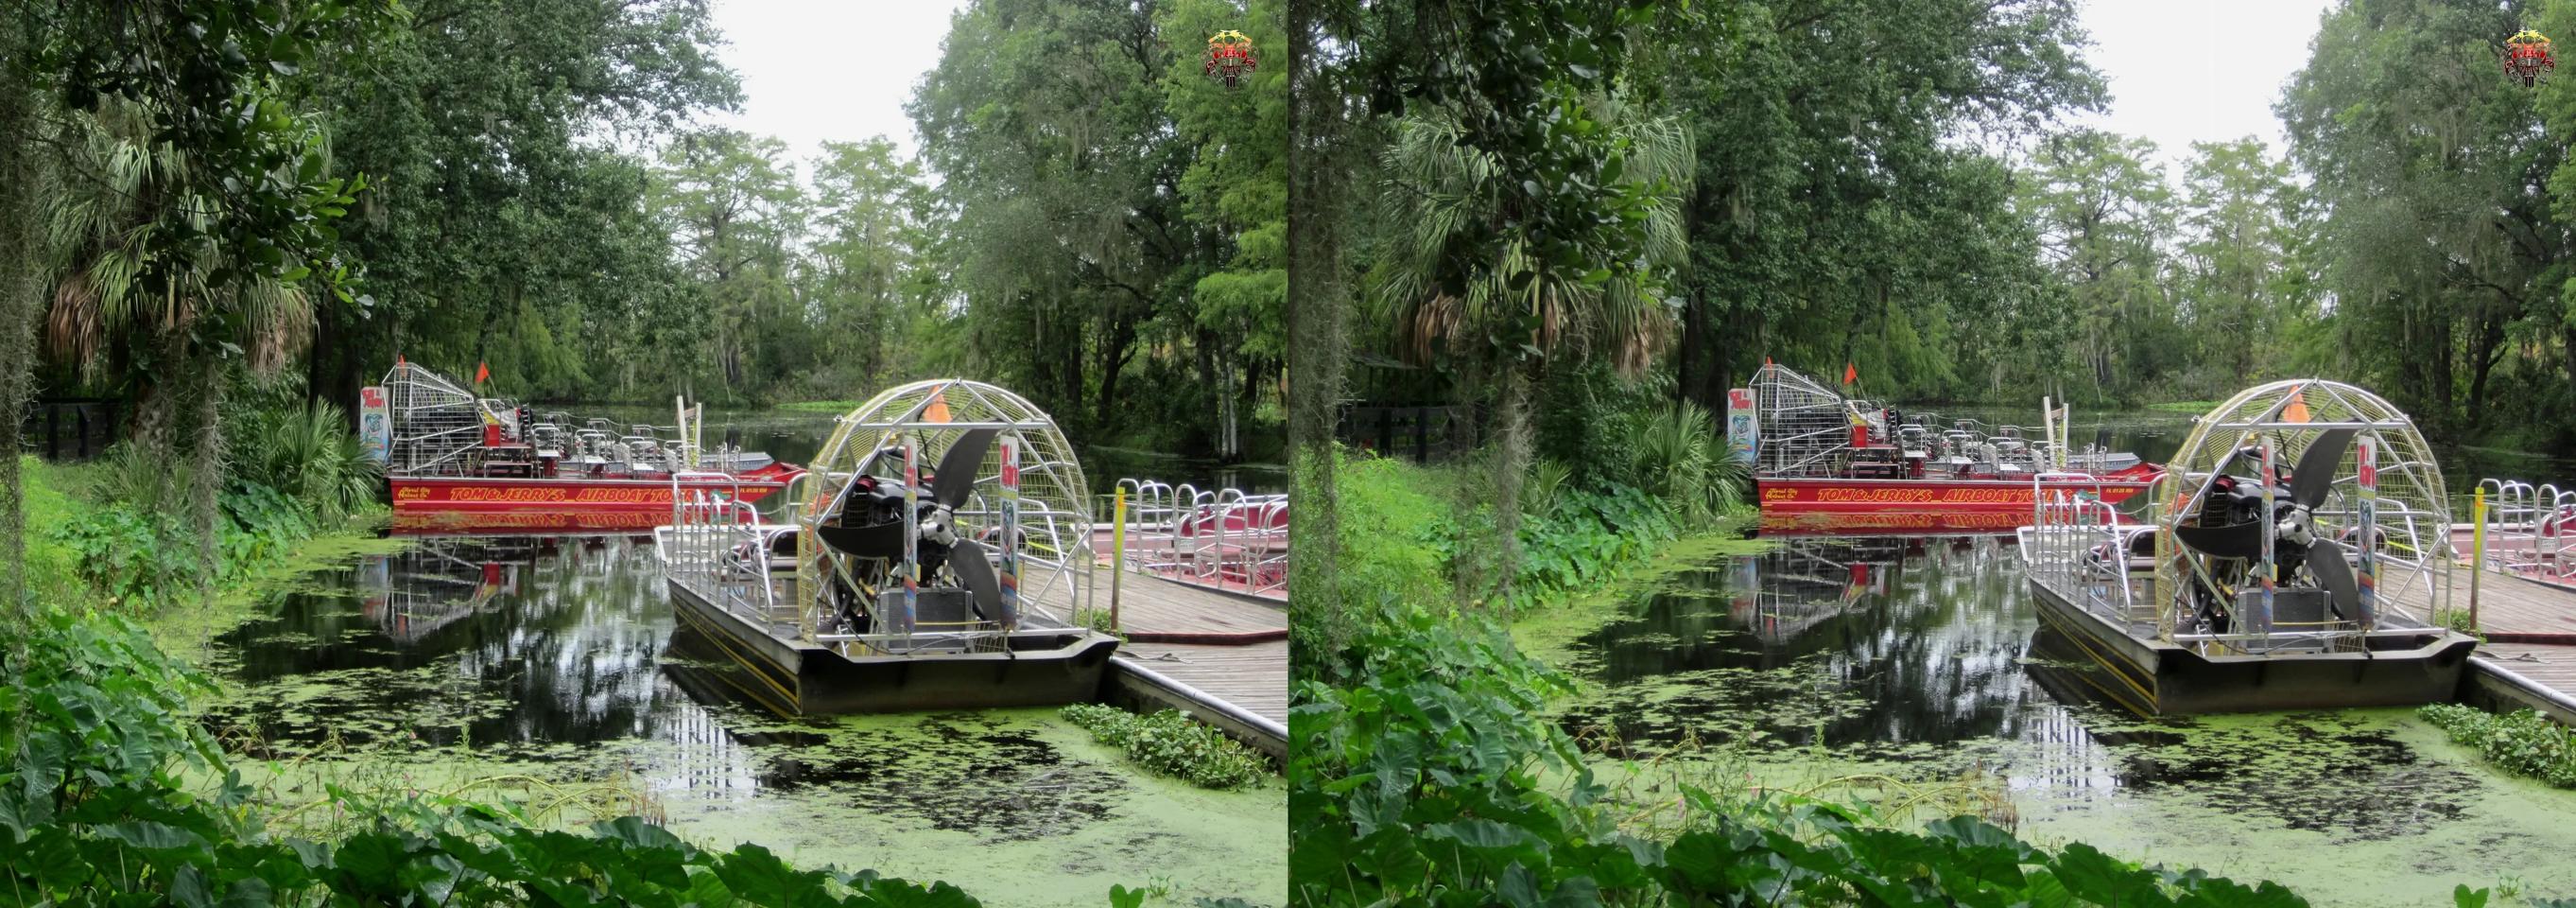 Airboats_FL 2021